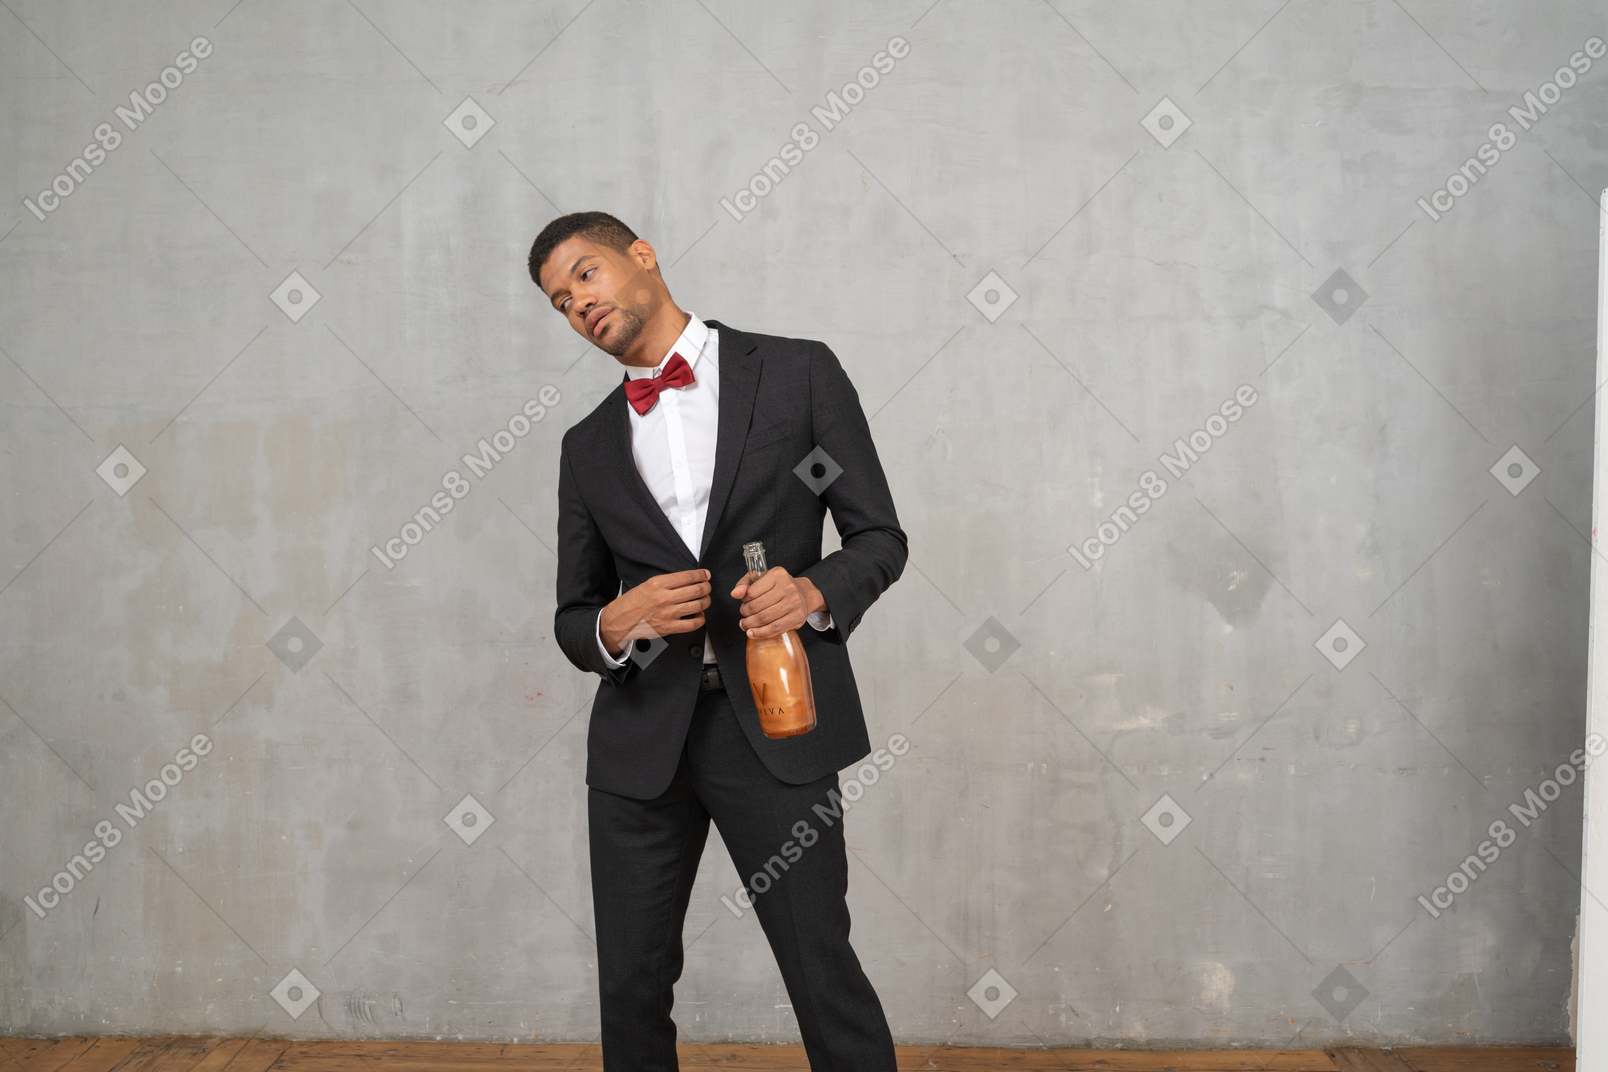 Intoxicated man in formal wear staggering around